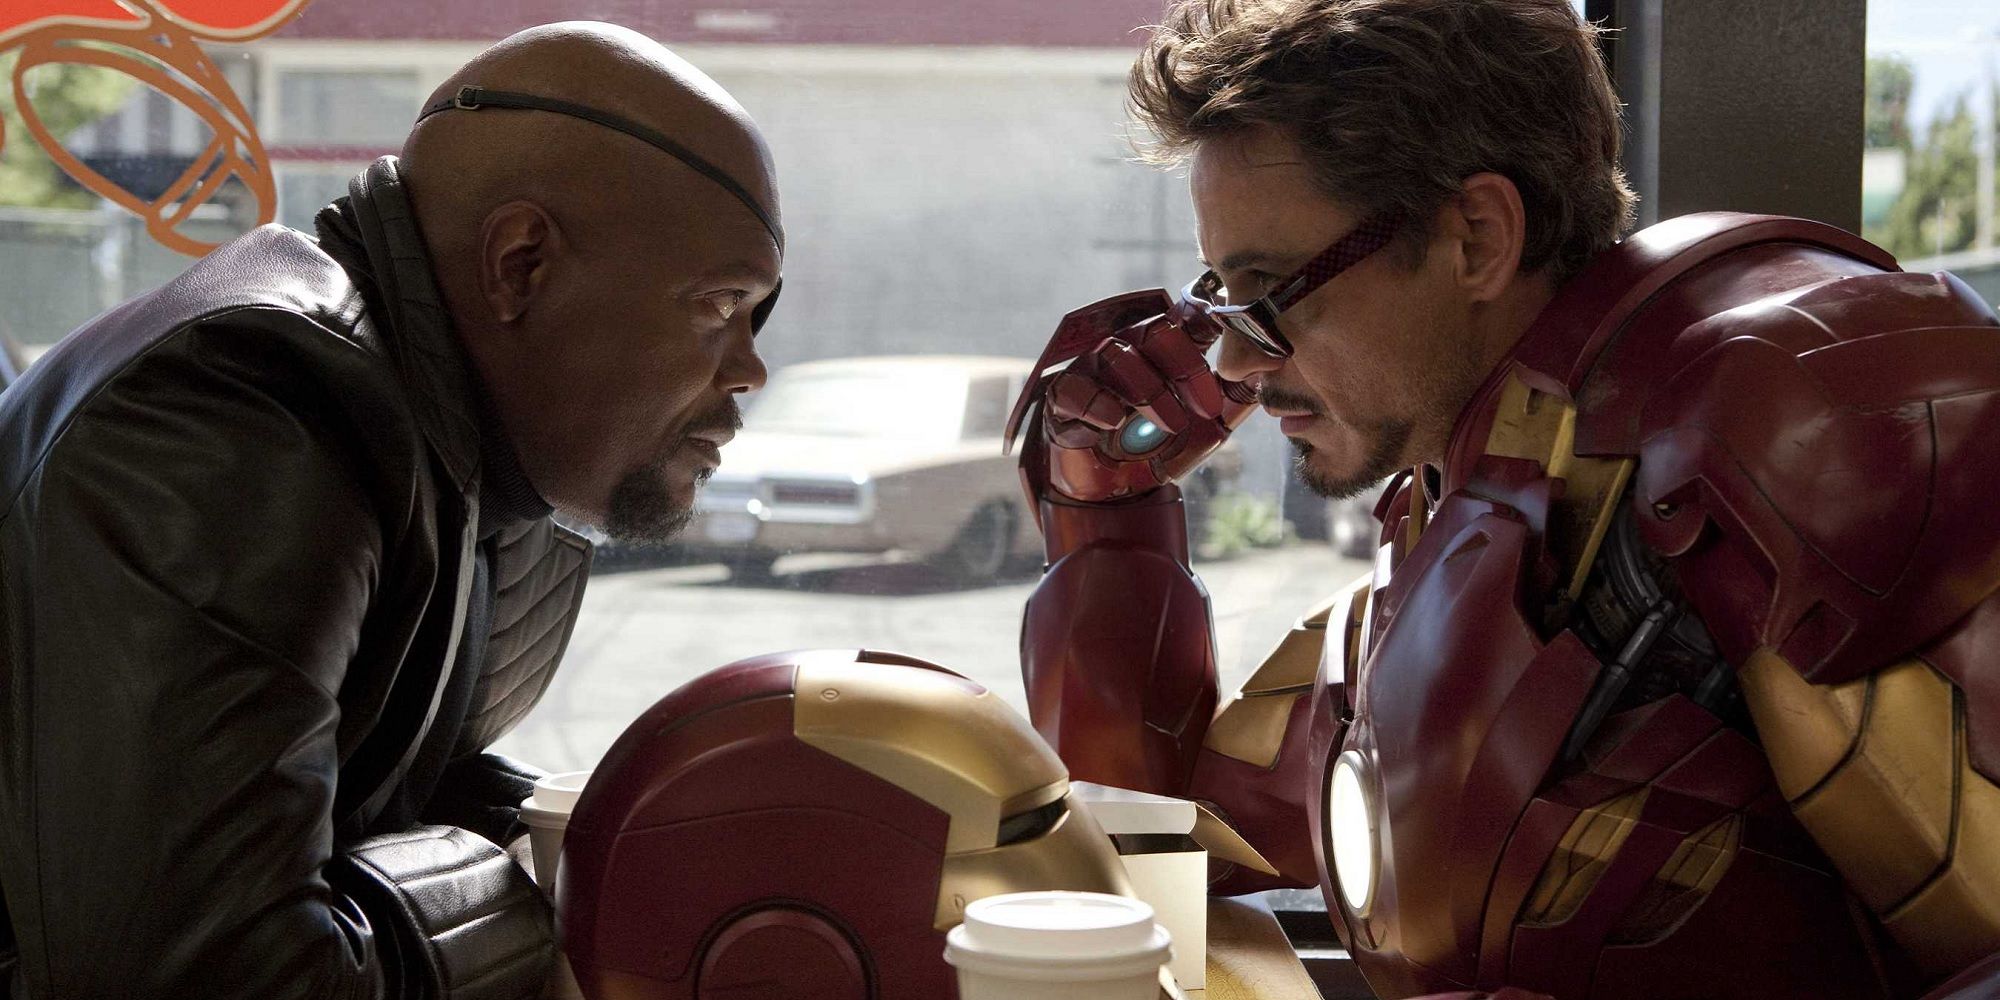 Nick Fury and Tony Stark in Iron Man 2 in the diner